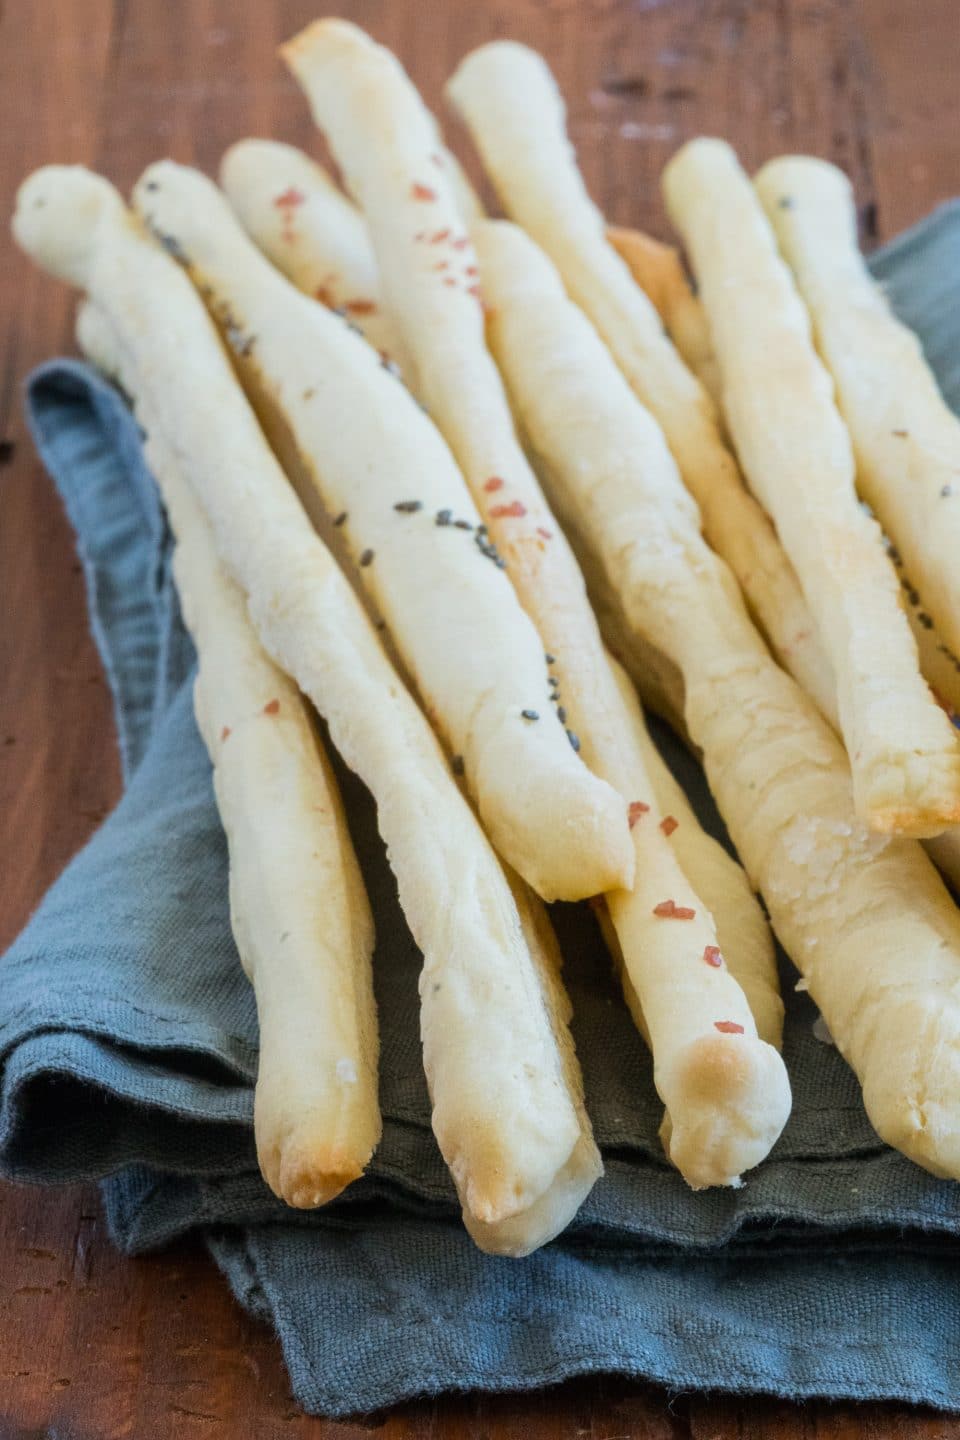 Grissini - How to Make Italian Breadsticks | Baking for Happiness